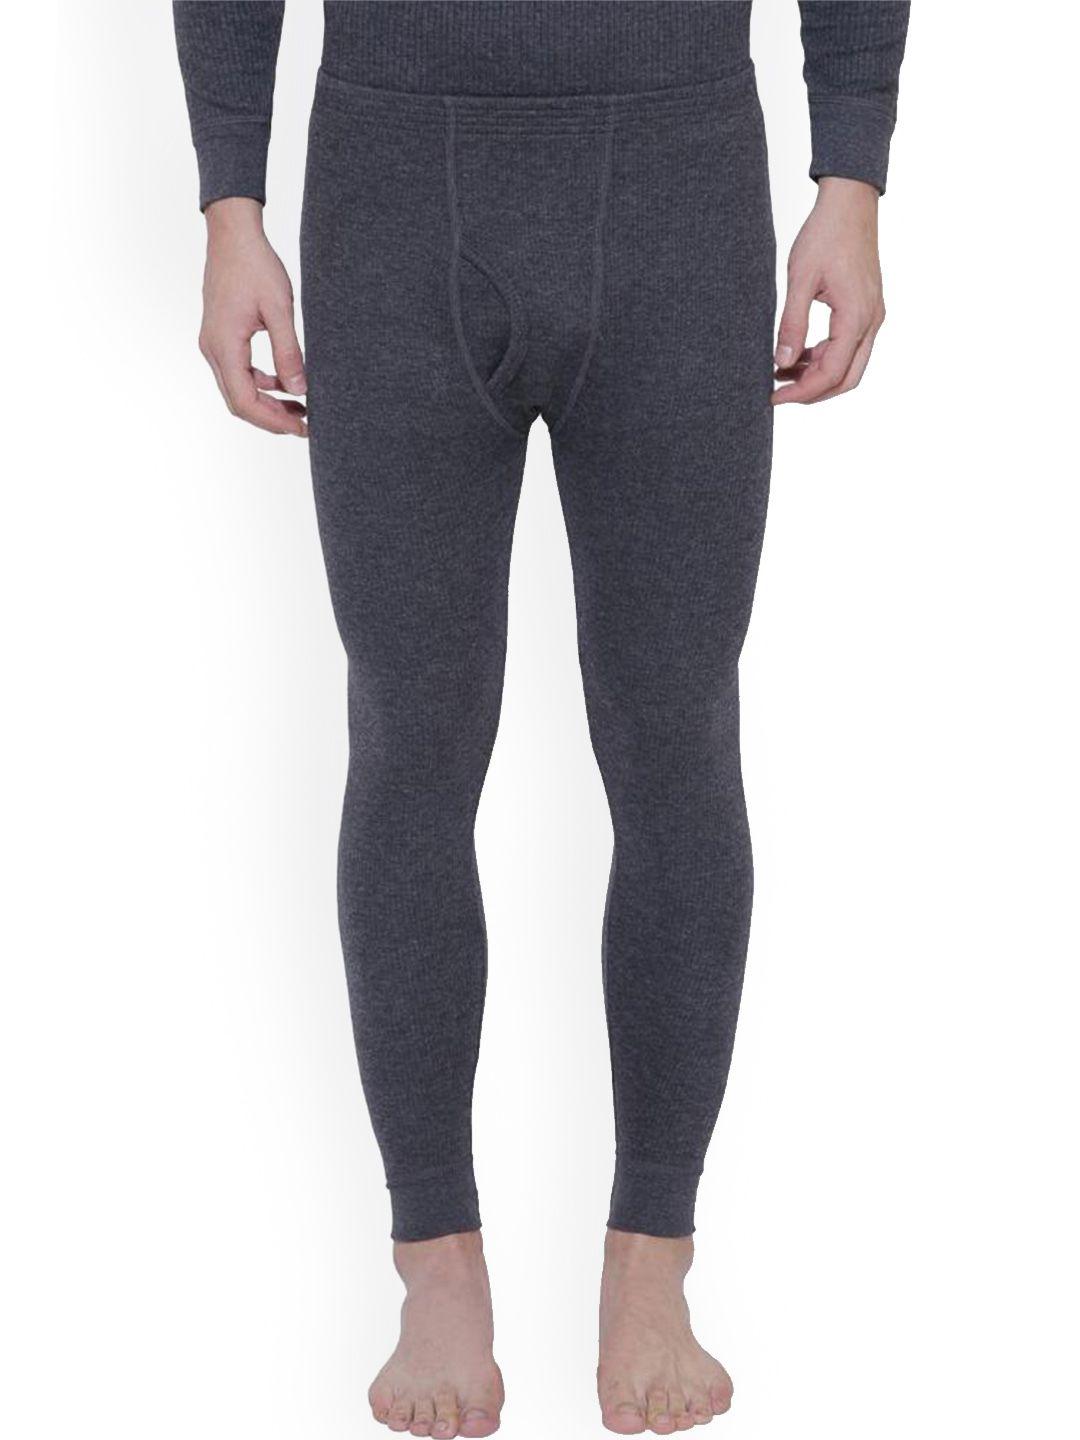 dyca men wool super stretchable thermal bottoms